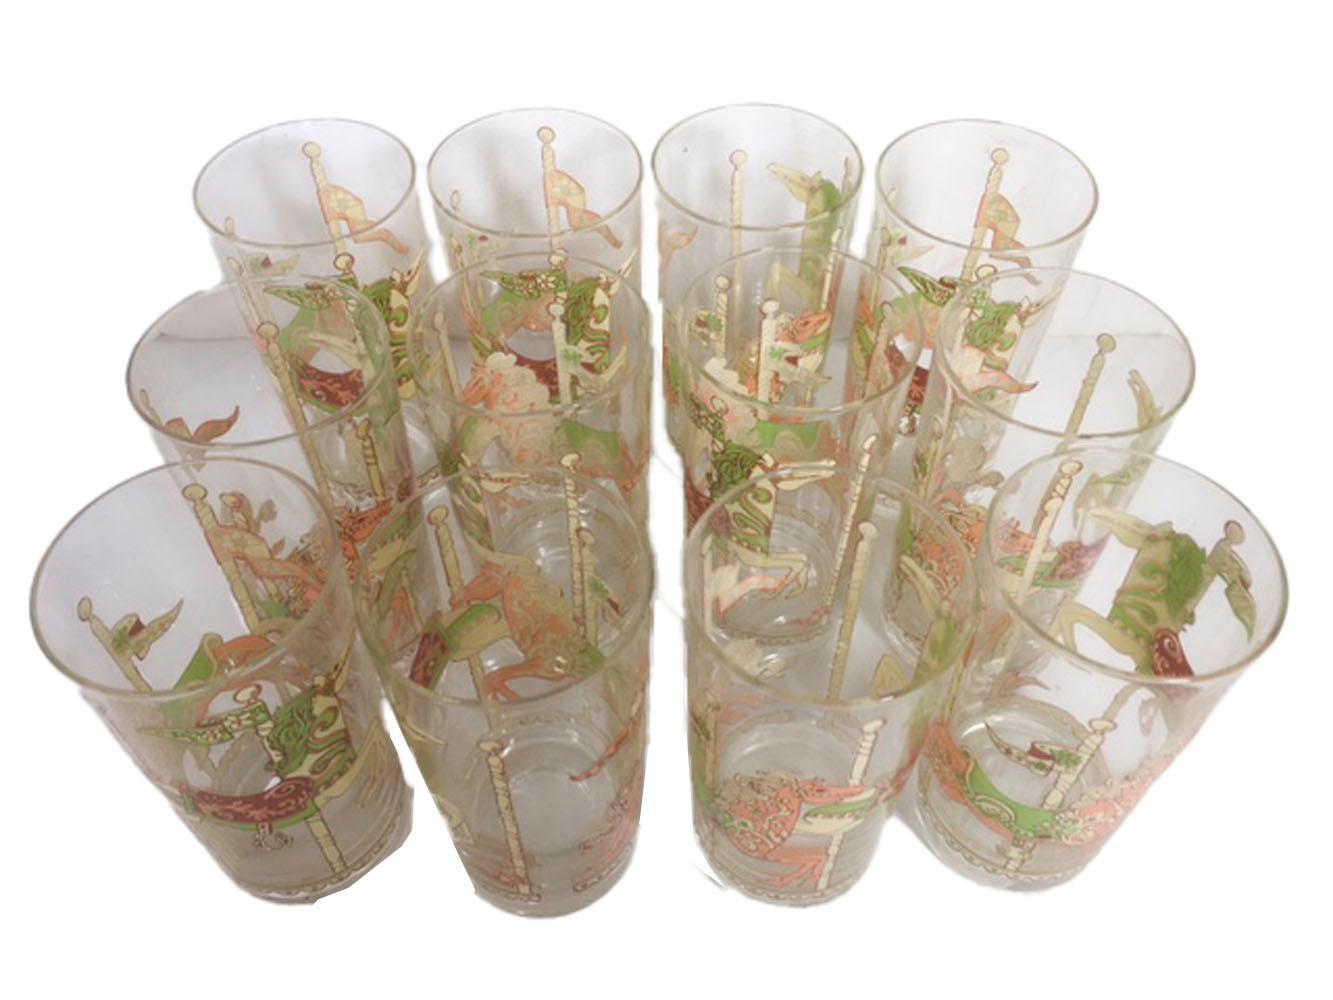 Set of 12 mid-century highball glasses designed by Georges Briard and decorated with carousel horses in cream, pink, green and rust enamel. All in excellent condition.